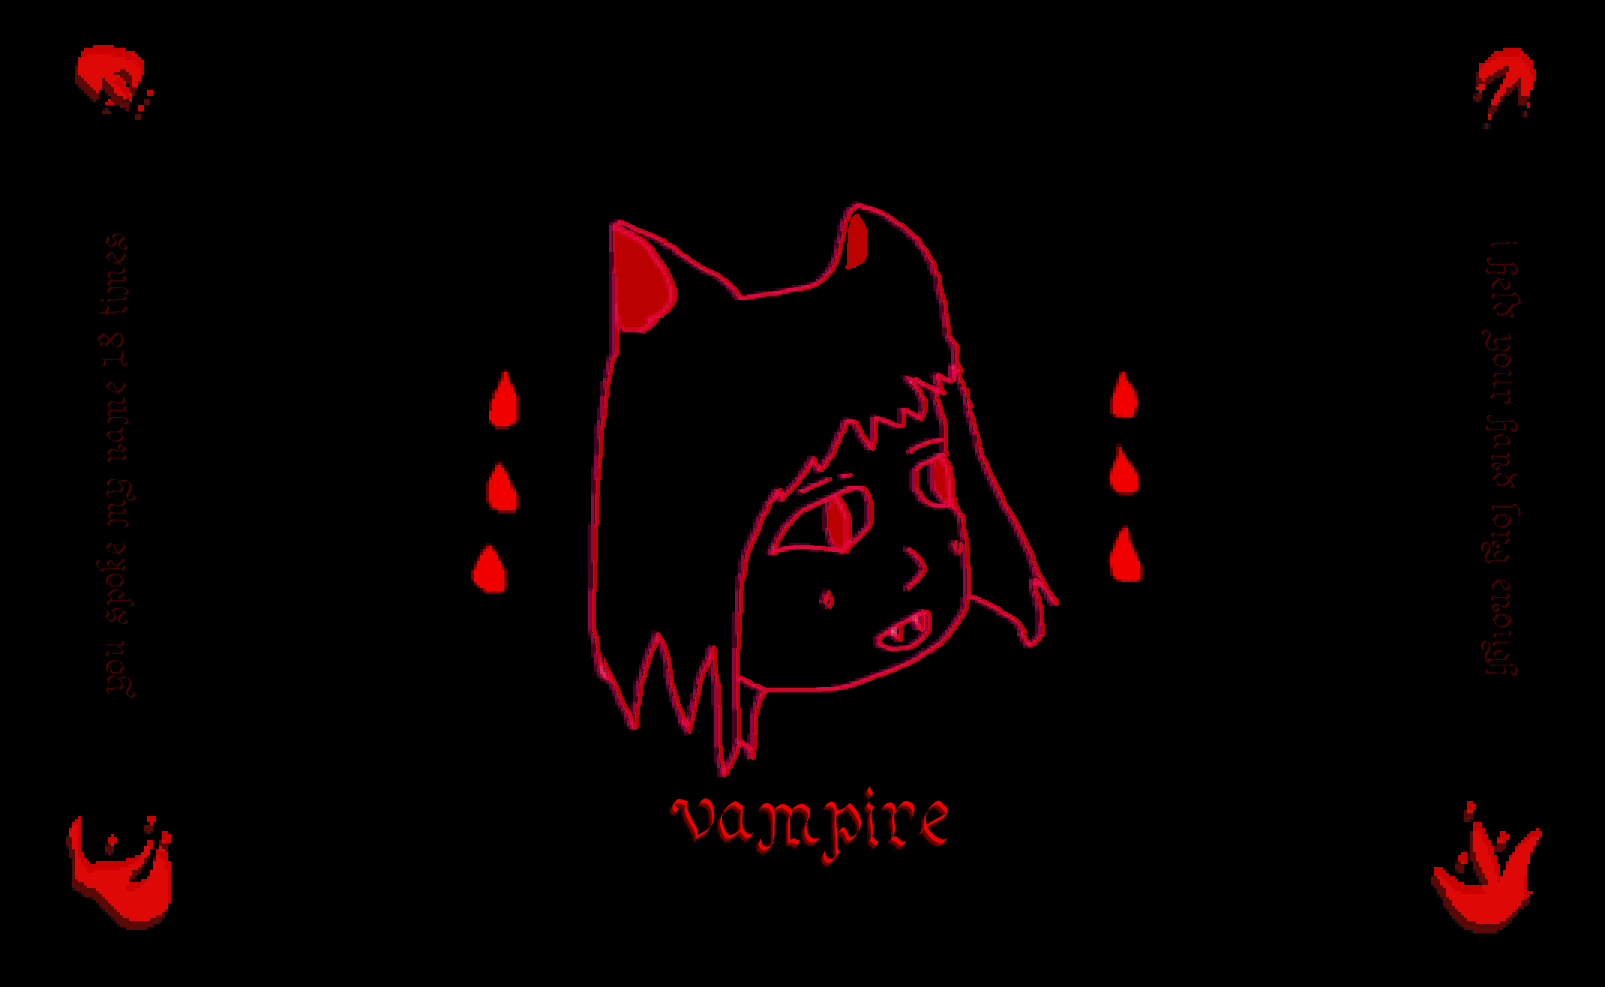 the title "vampire" in gothic script and a cute cat person with drops of blood descending & flowers